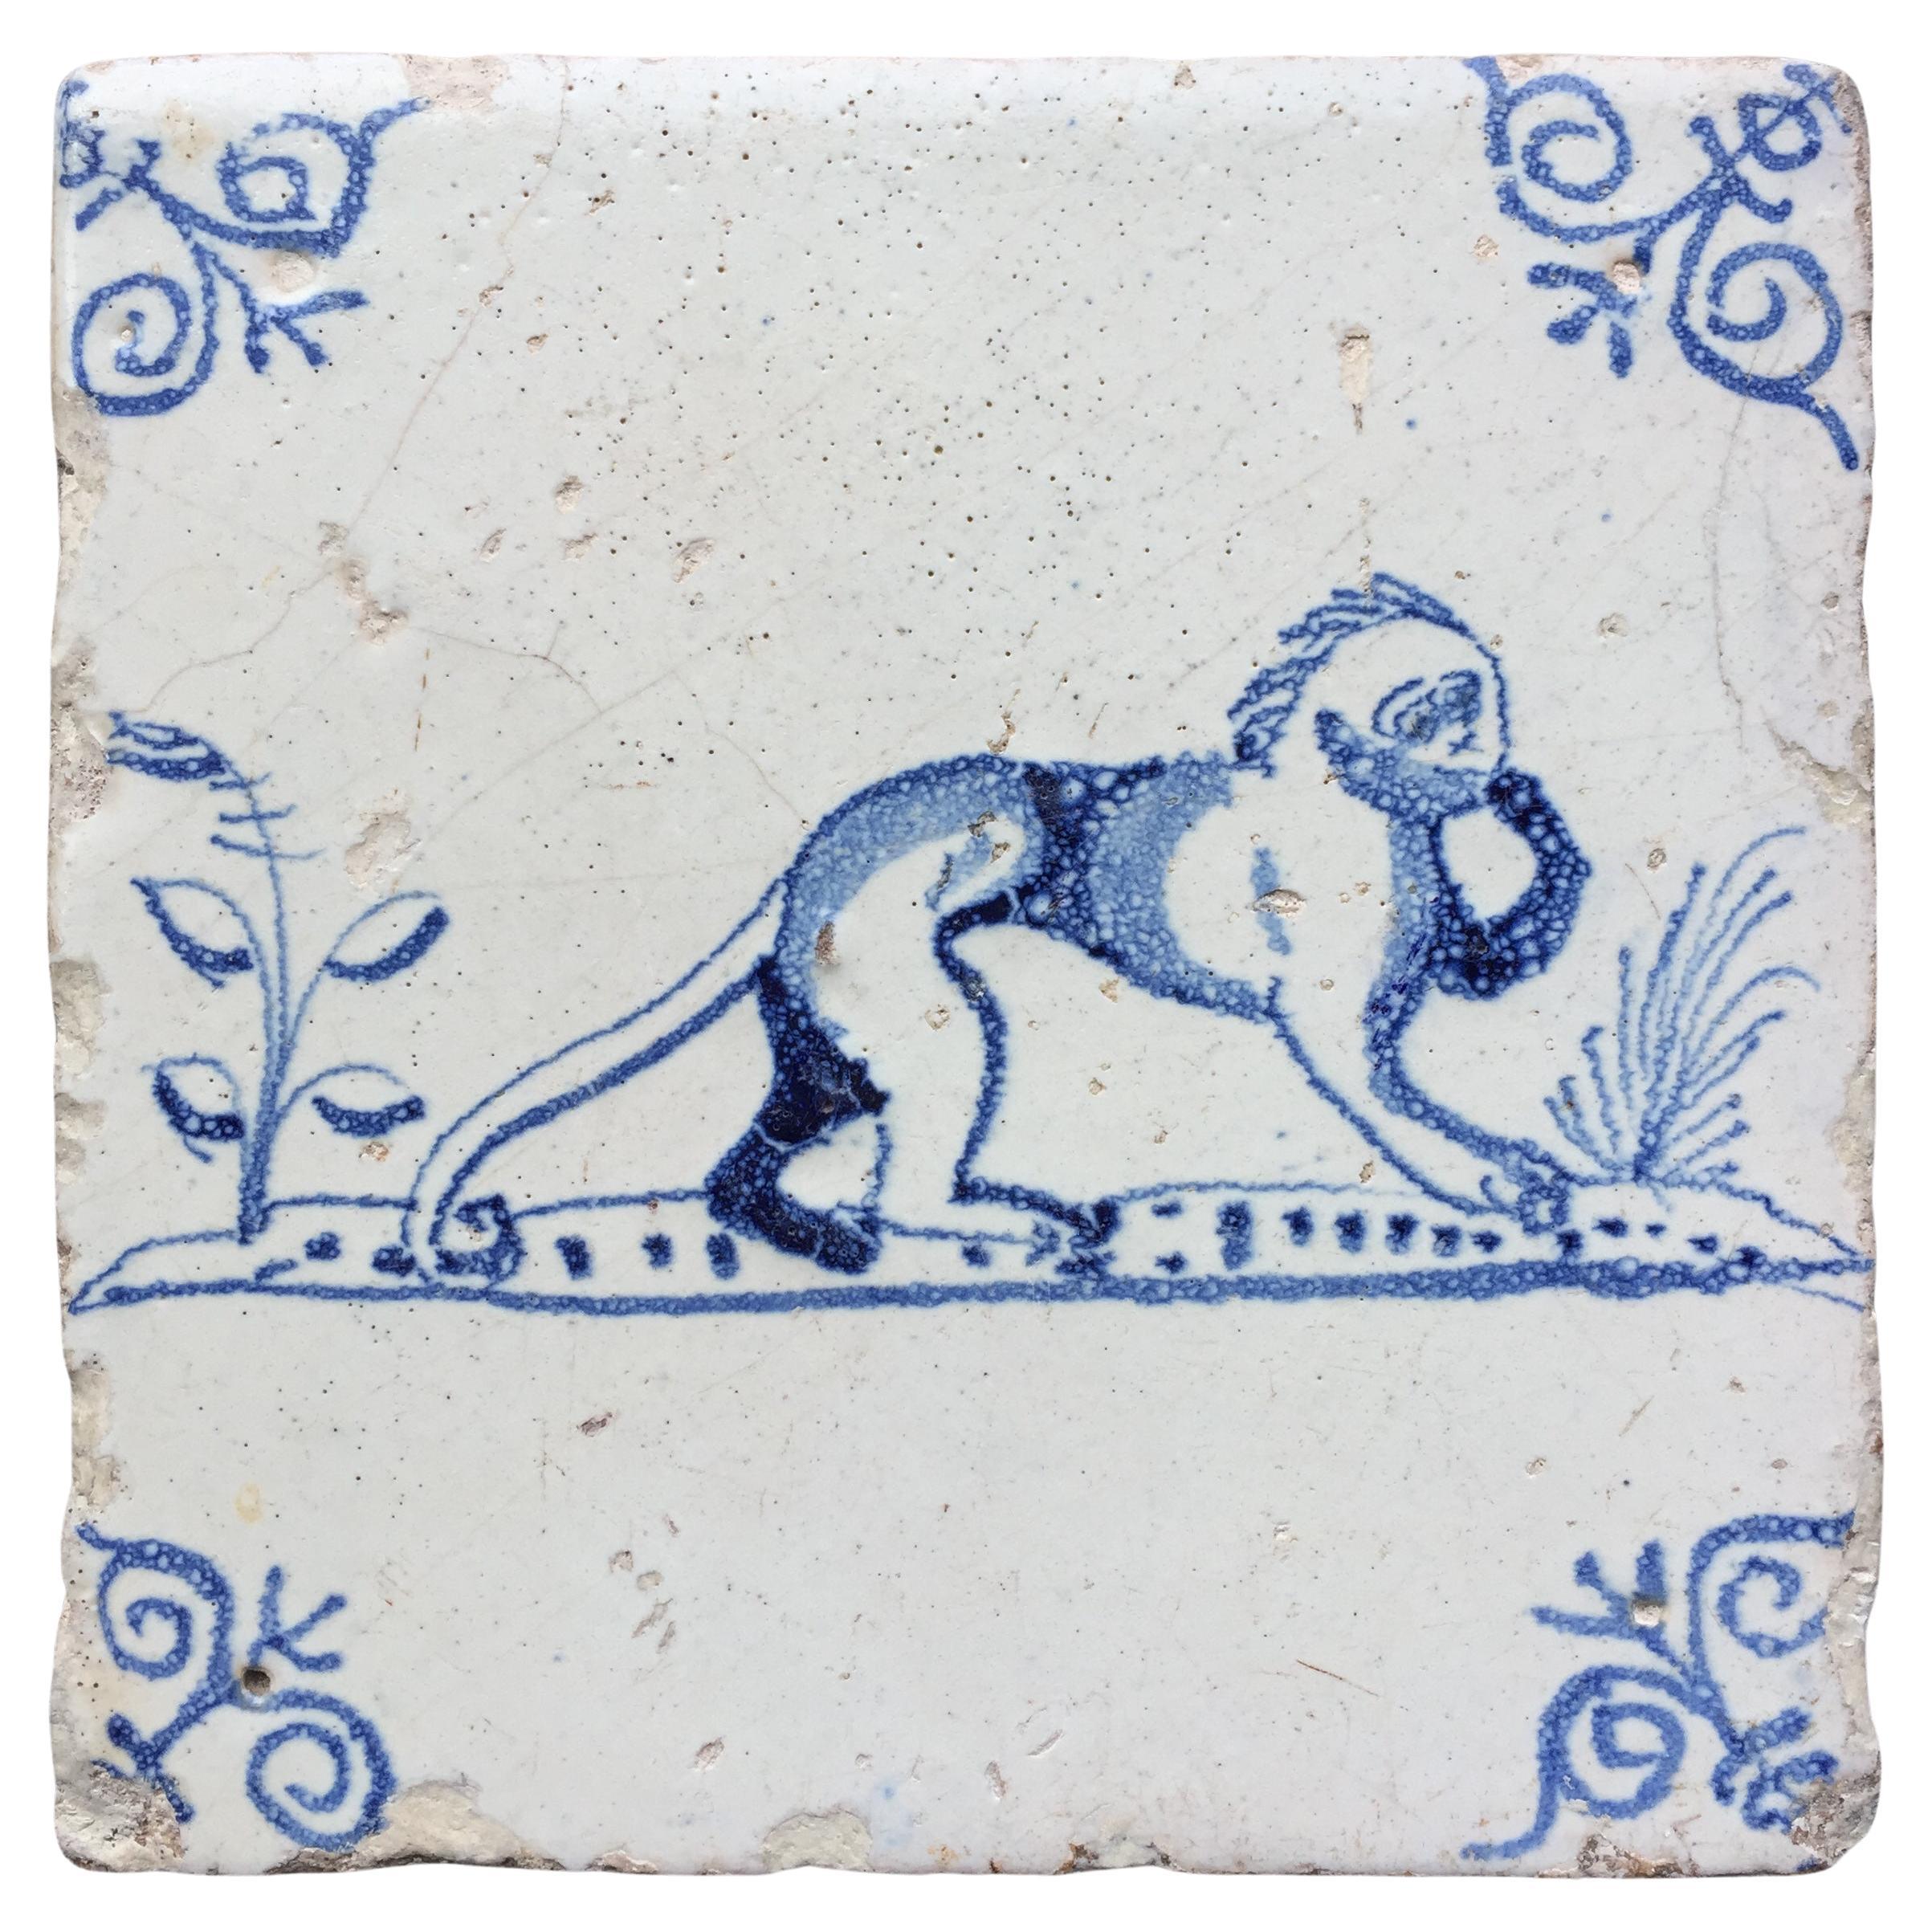 Blue and White Dutch Delft Tile with Monkey, Mid 17th Century